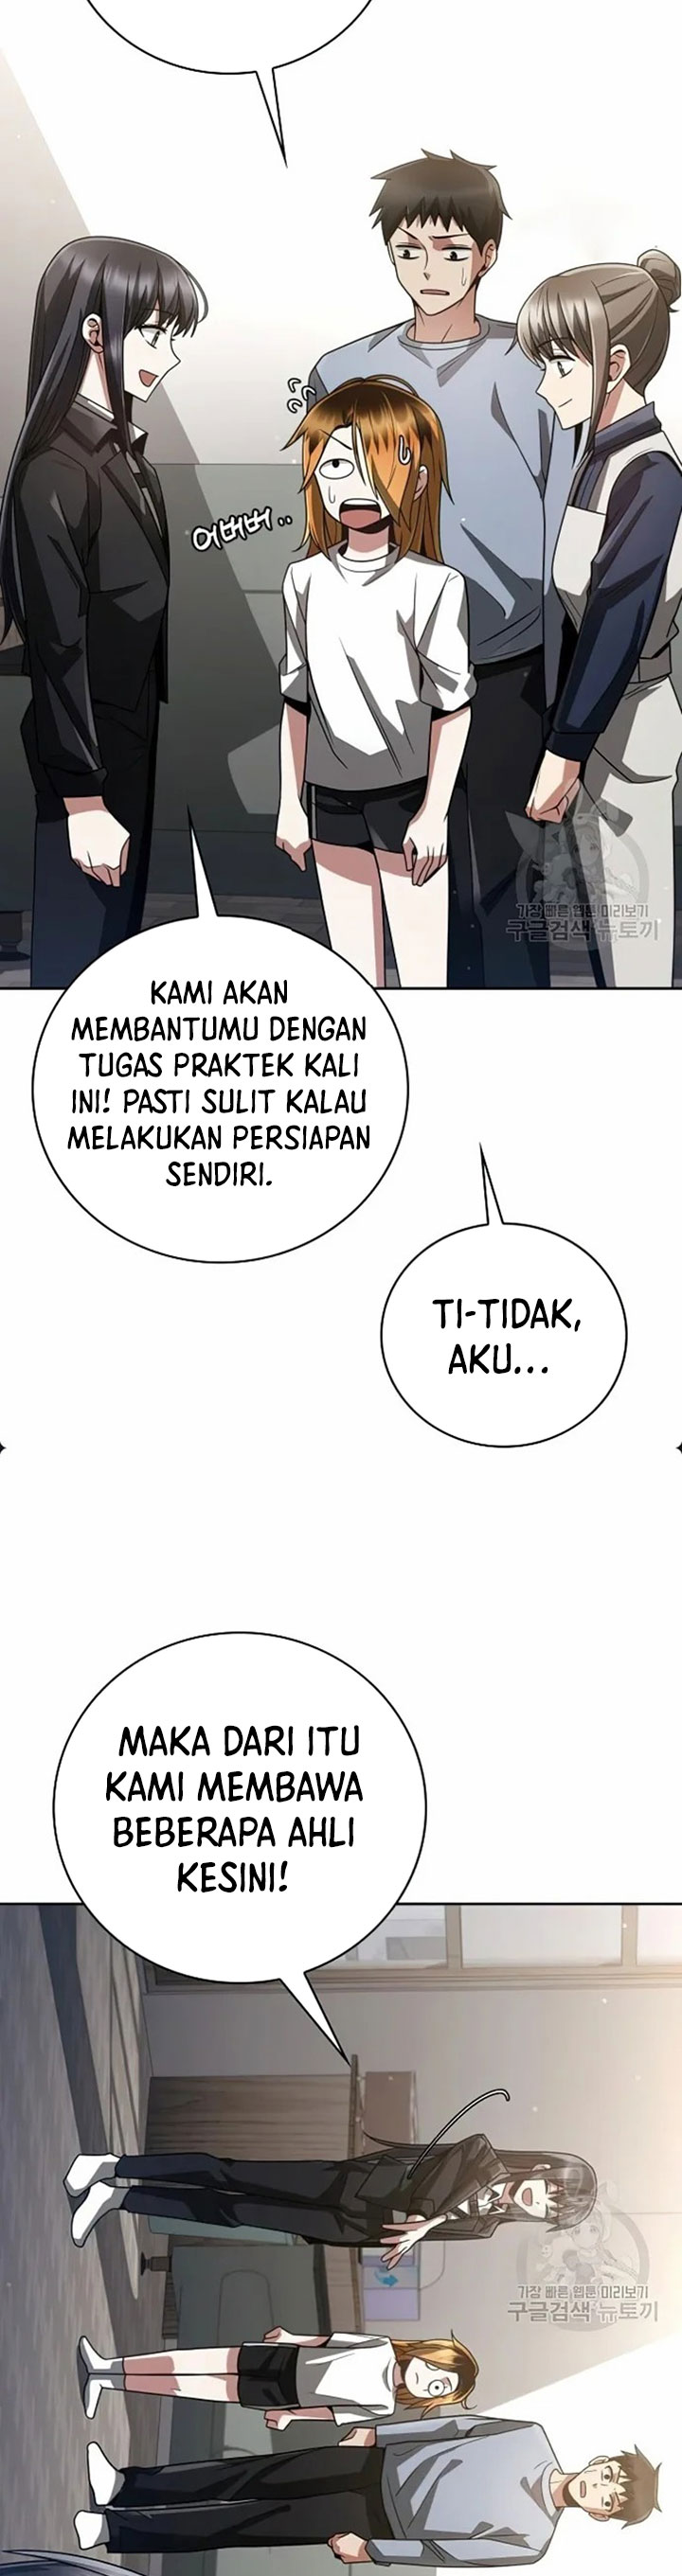 Dilarang COPAS - situs resmi www.mangacanblog.com - Komik clever cleaning life of the returned genius hunter 029 - chapter 29 30 Indonesia clever cleaning life of the returned genius hunter 029 - chapter 29 Terbaru 30|Baca Manga Komik Indonesia|Mangacan